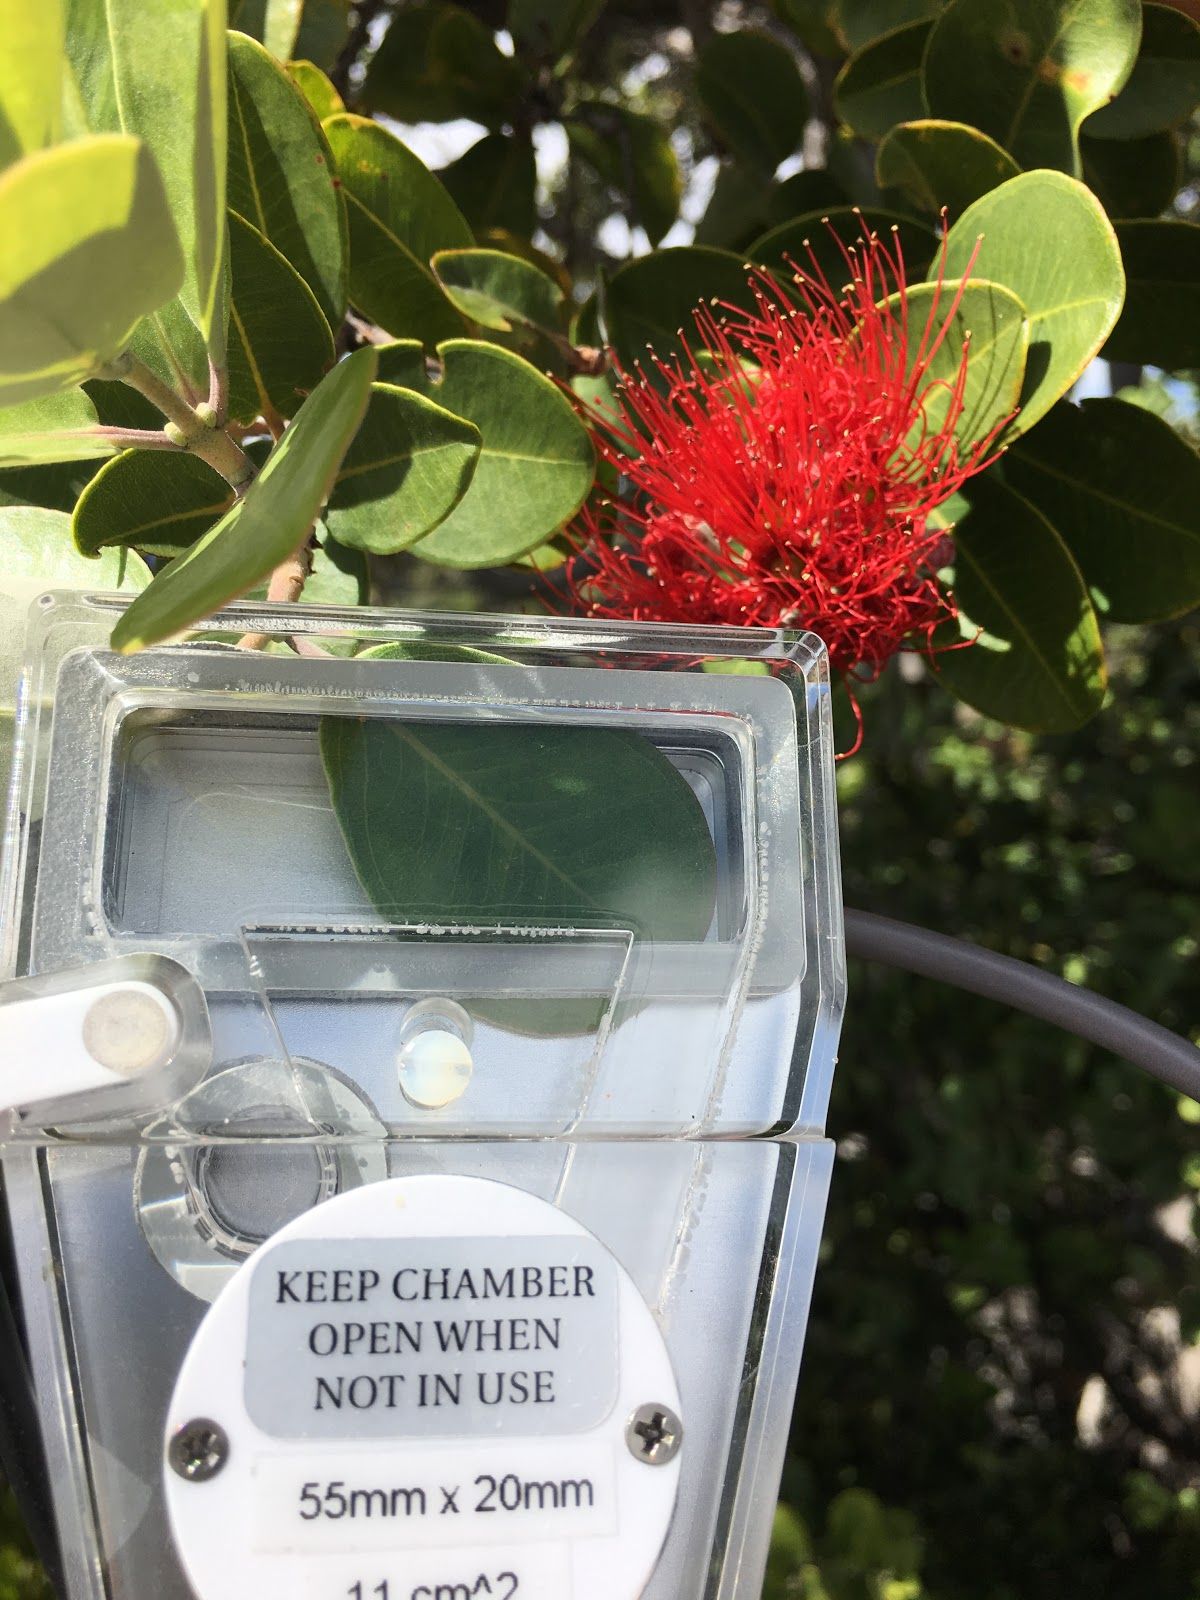 The Ryers use one of our CID leaf chambers in order to measure the rate of photosynthesis in a single leaf with the CI-340 Handheld Photosynthesis System.